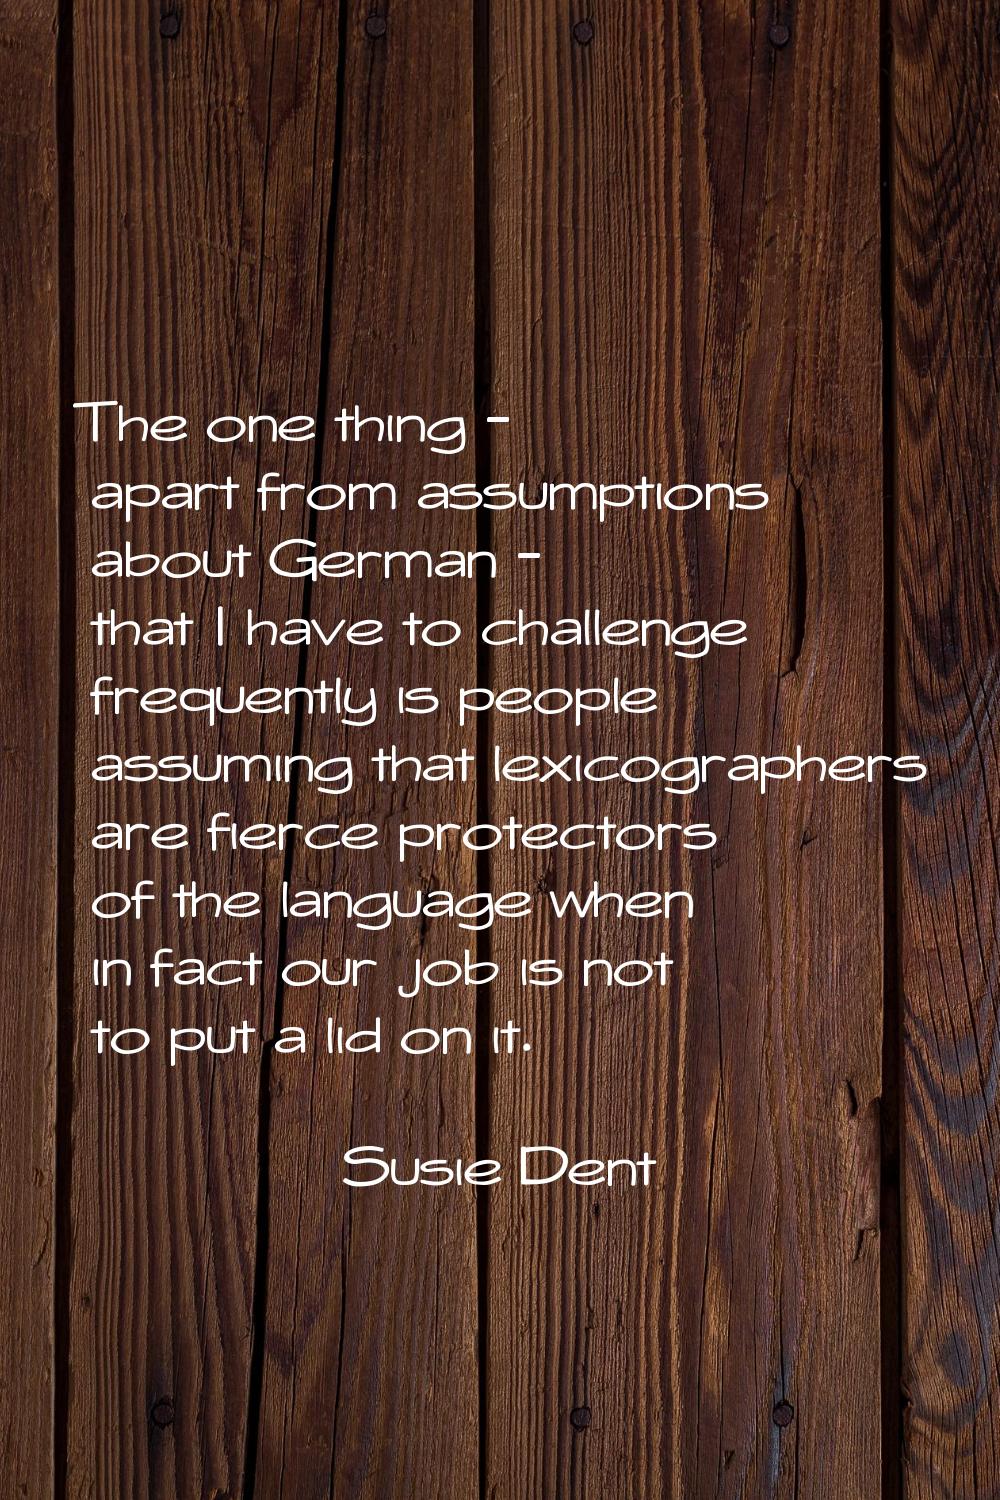 The one thing - apart from assumptions about German - that I have to challenge frequently is people